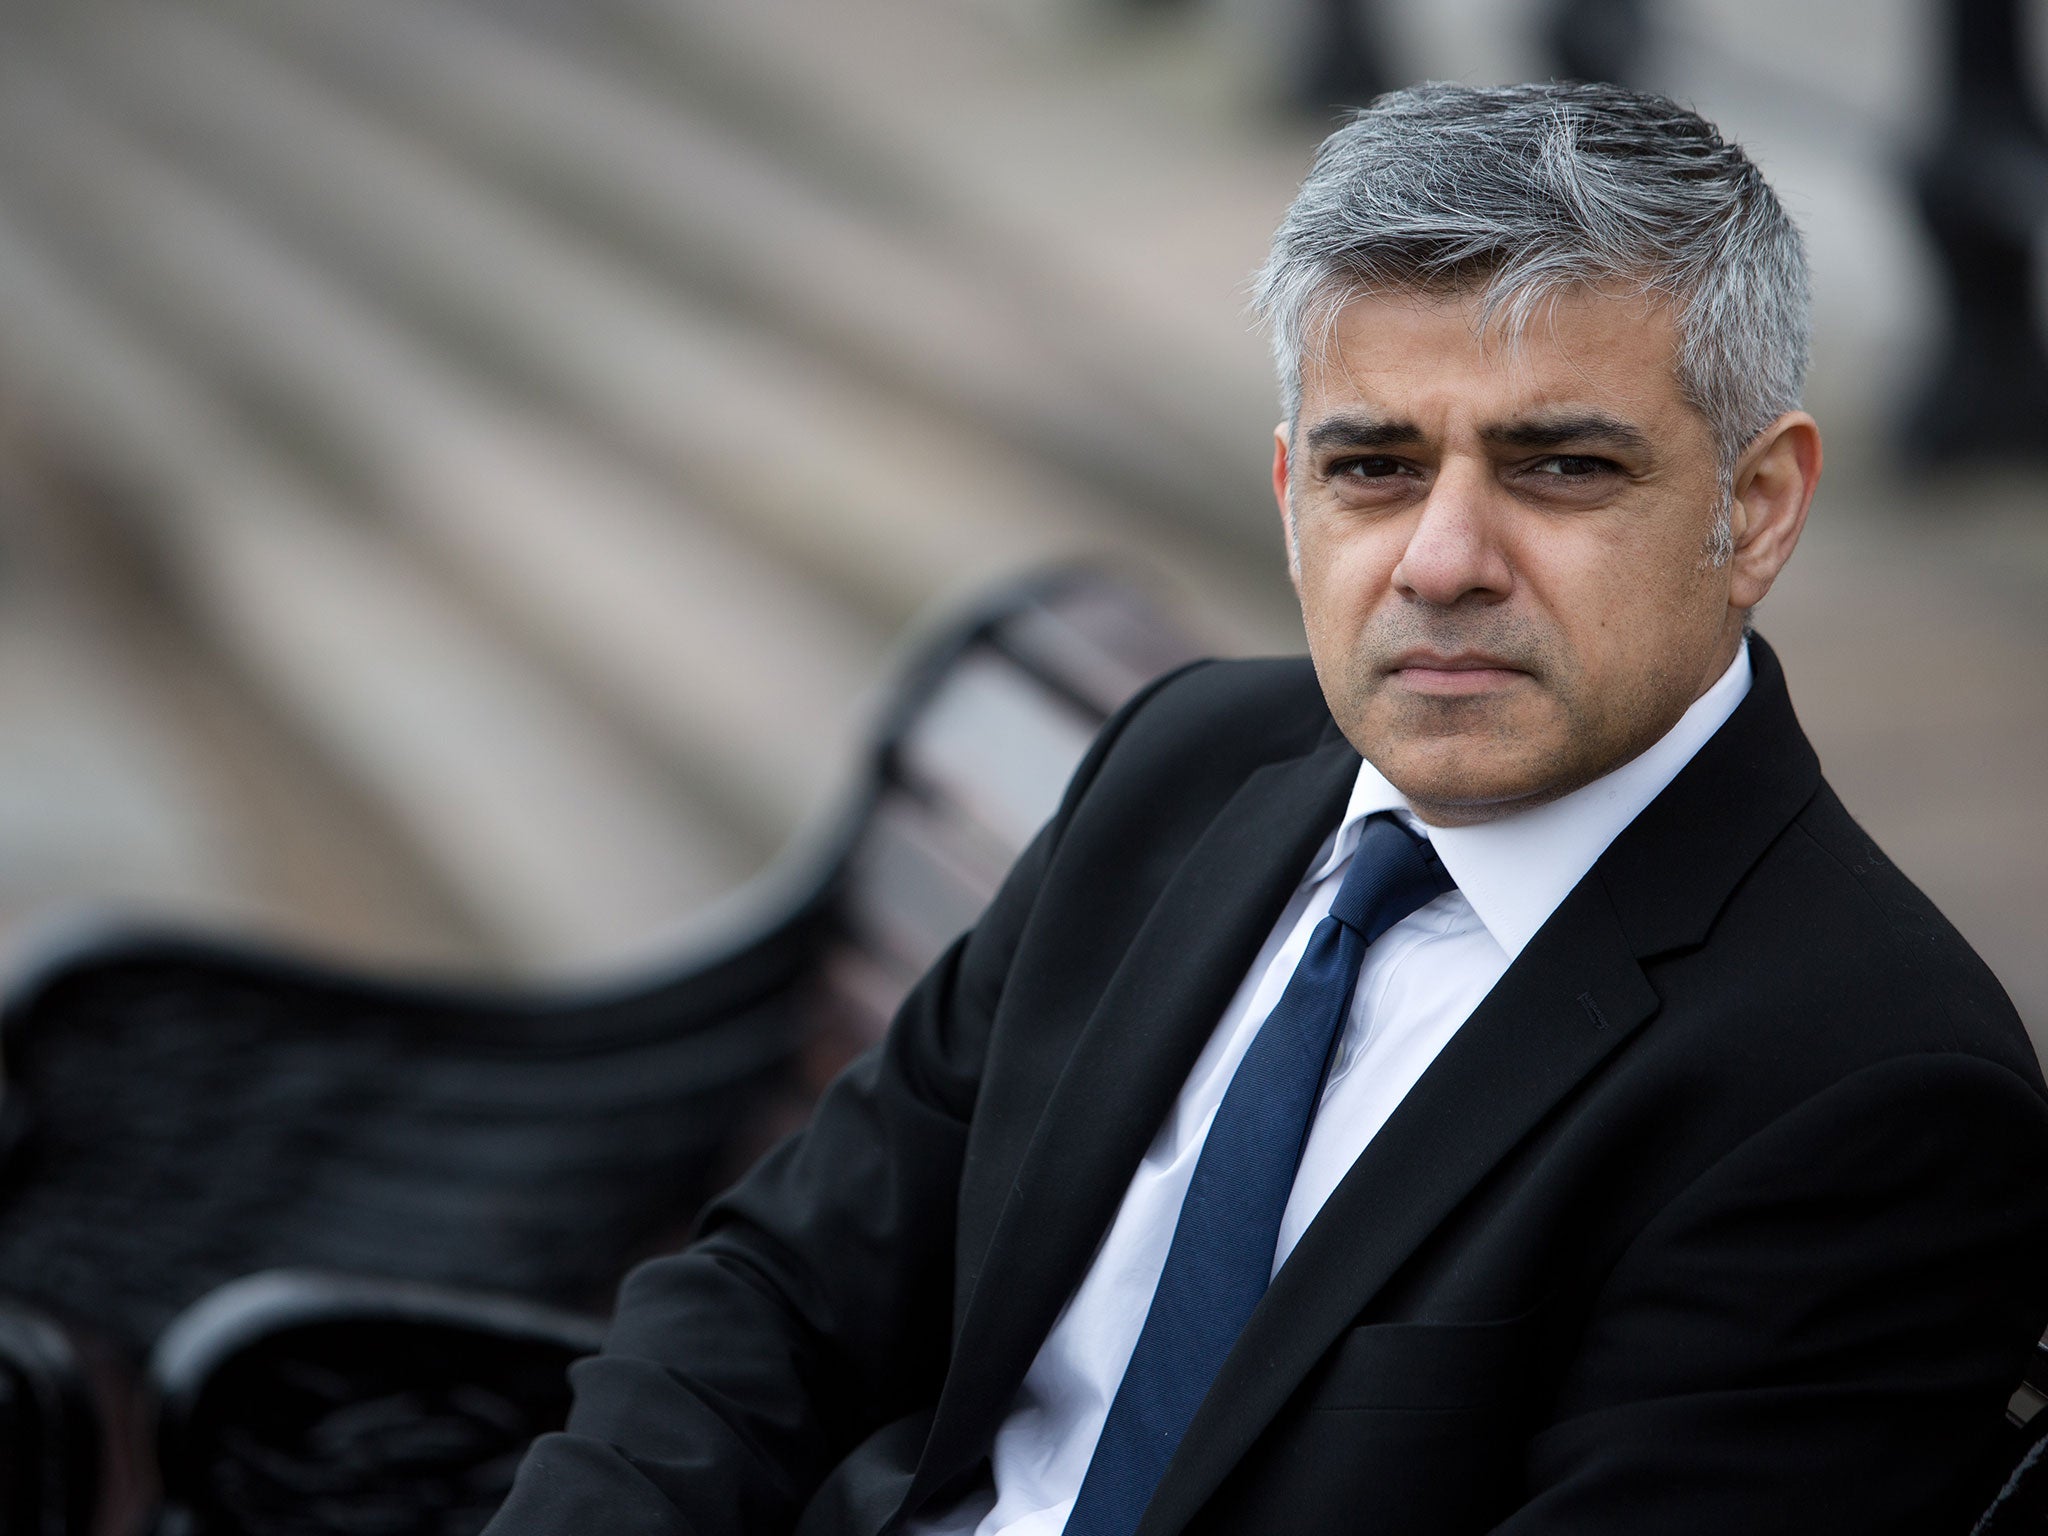 Sadiq Khan, the MP for Tooting and shadow Justice Secretary, said it appeared to him that government policies were disproportionately benefiting older voters